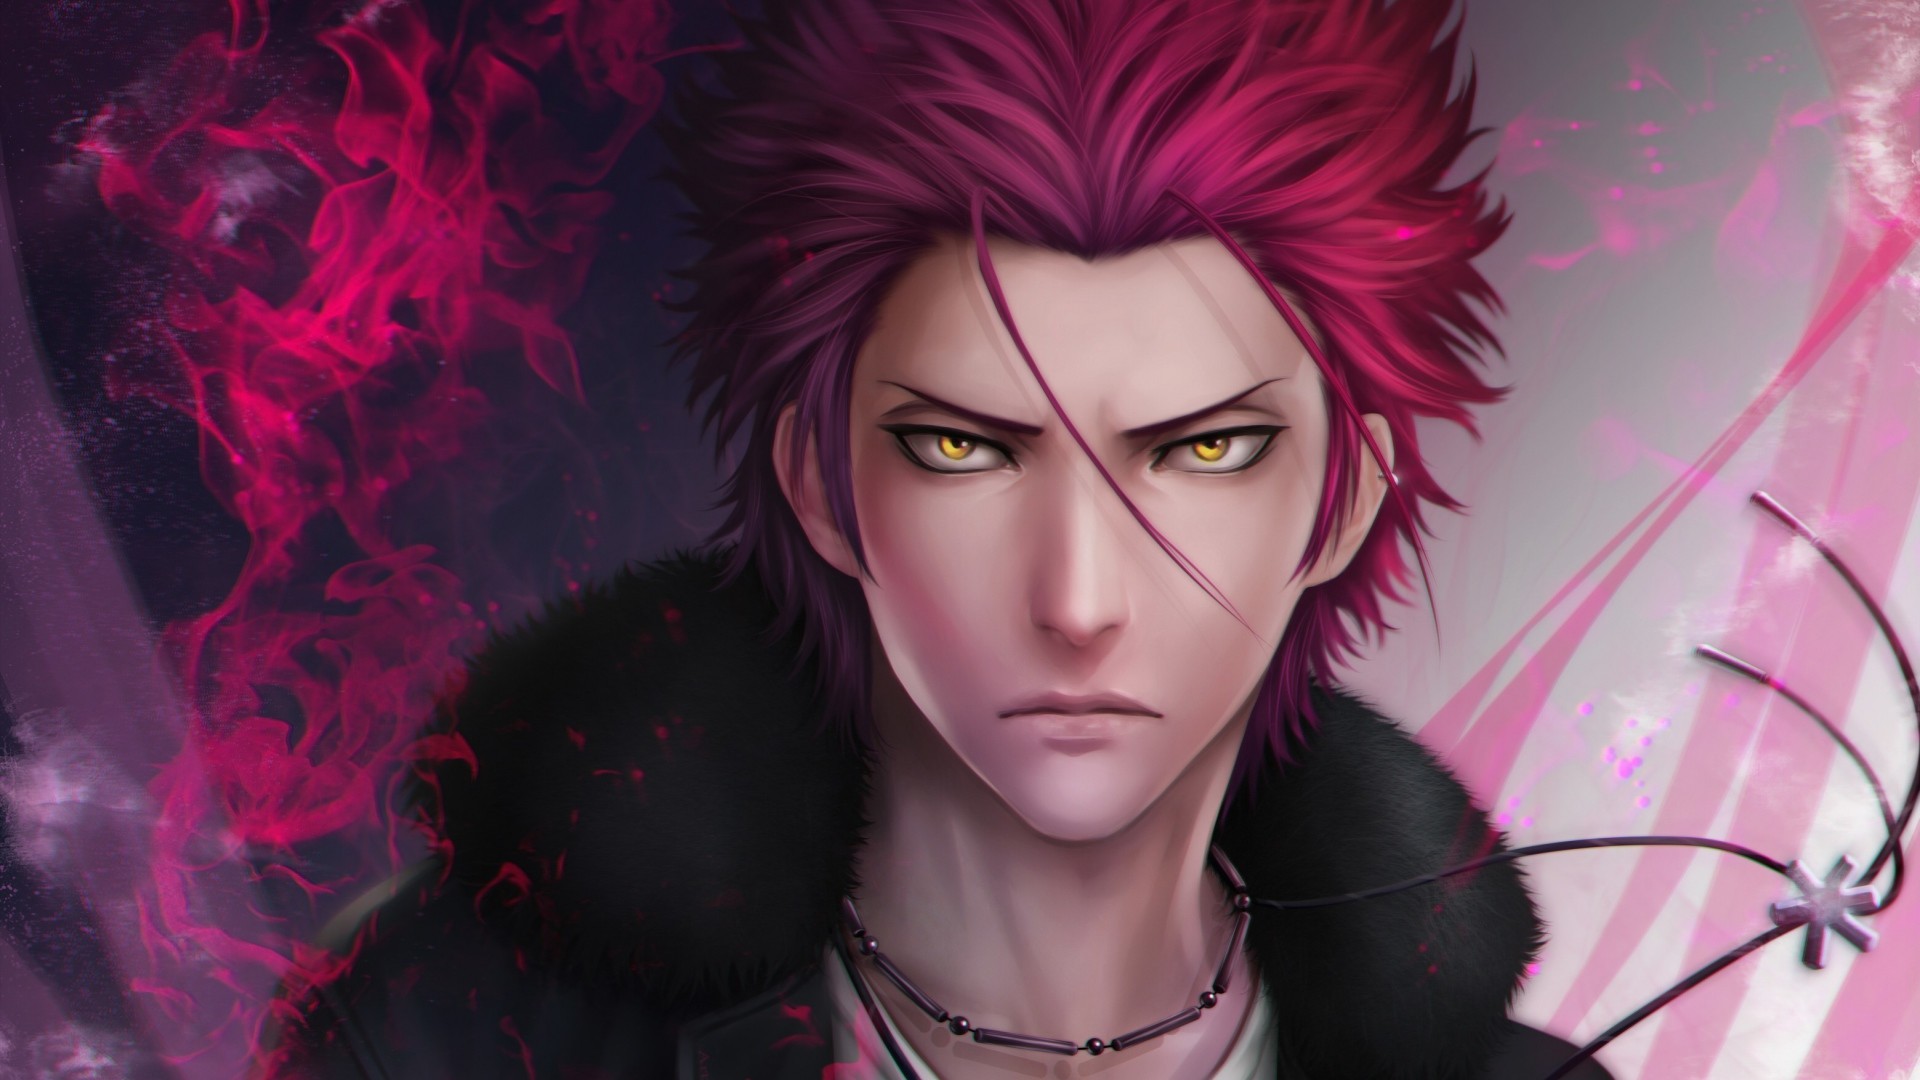 1920x1080  Wallpaper suoh mikoto, project k, anime, guy